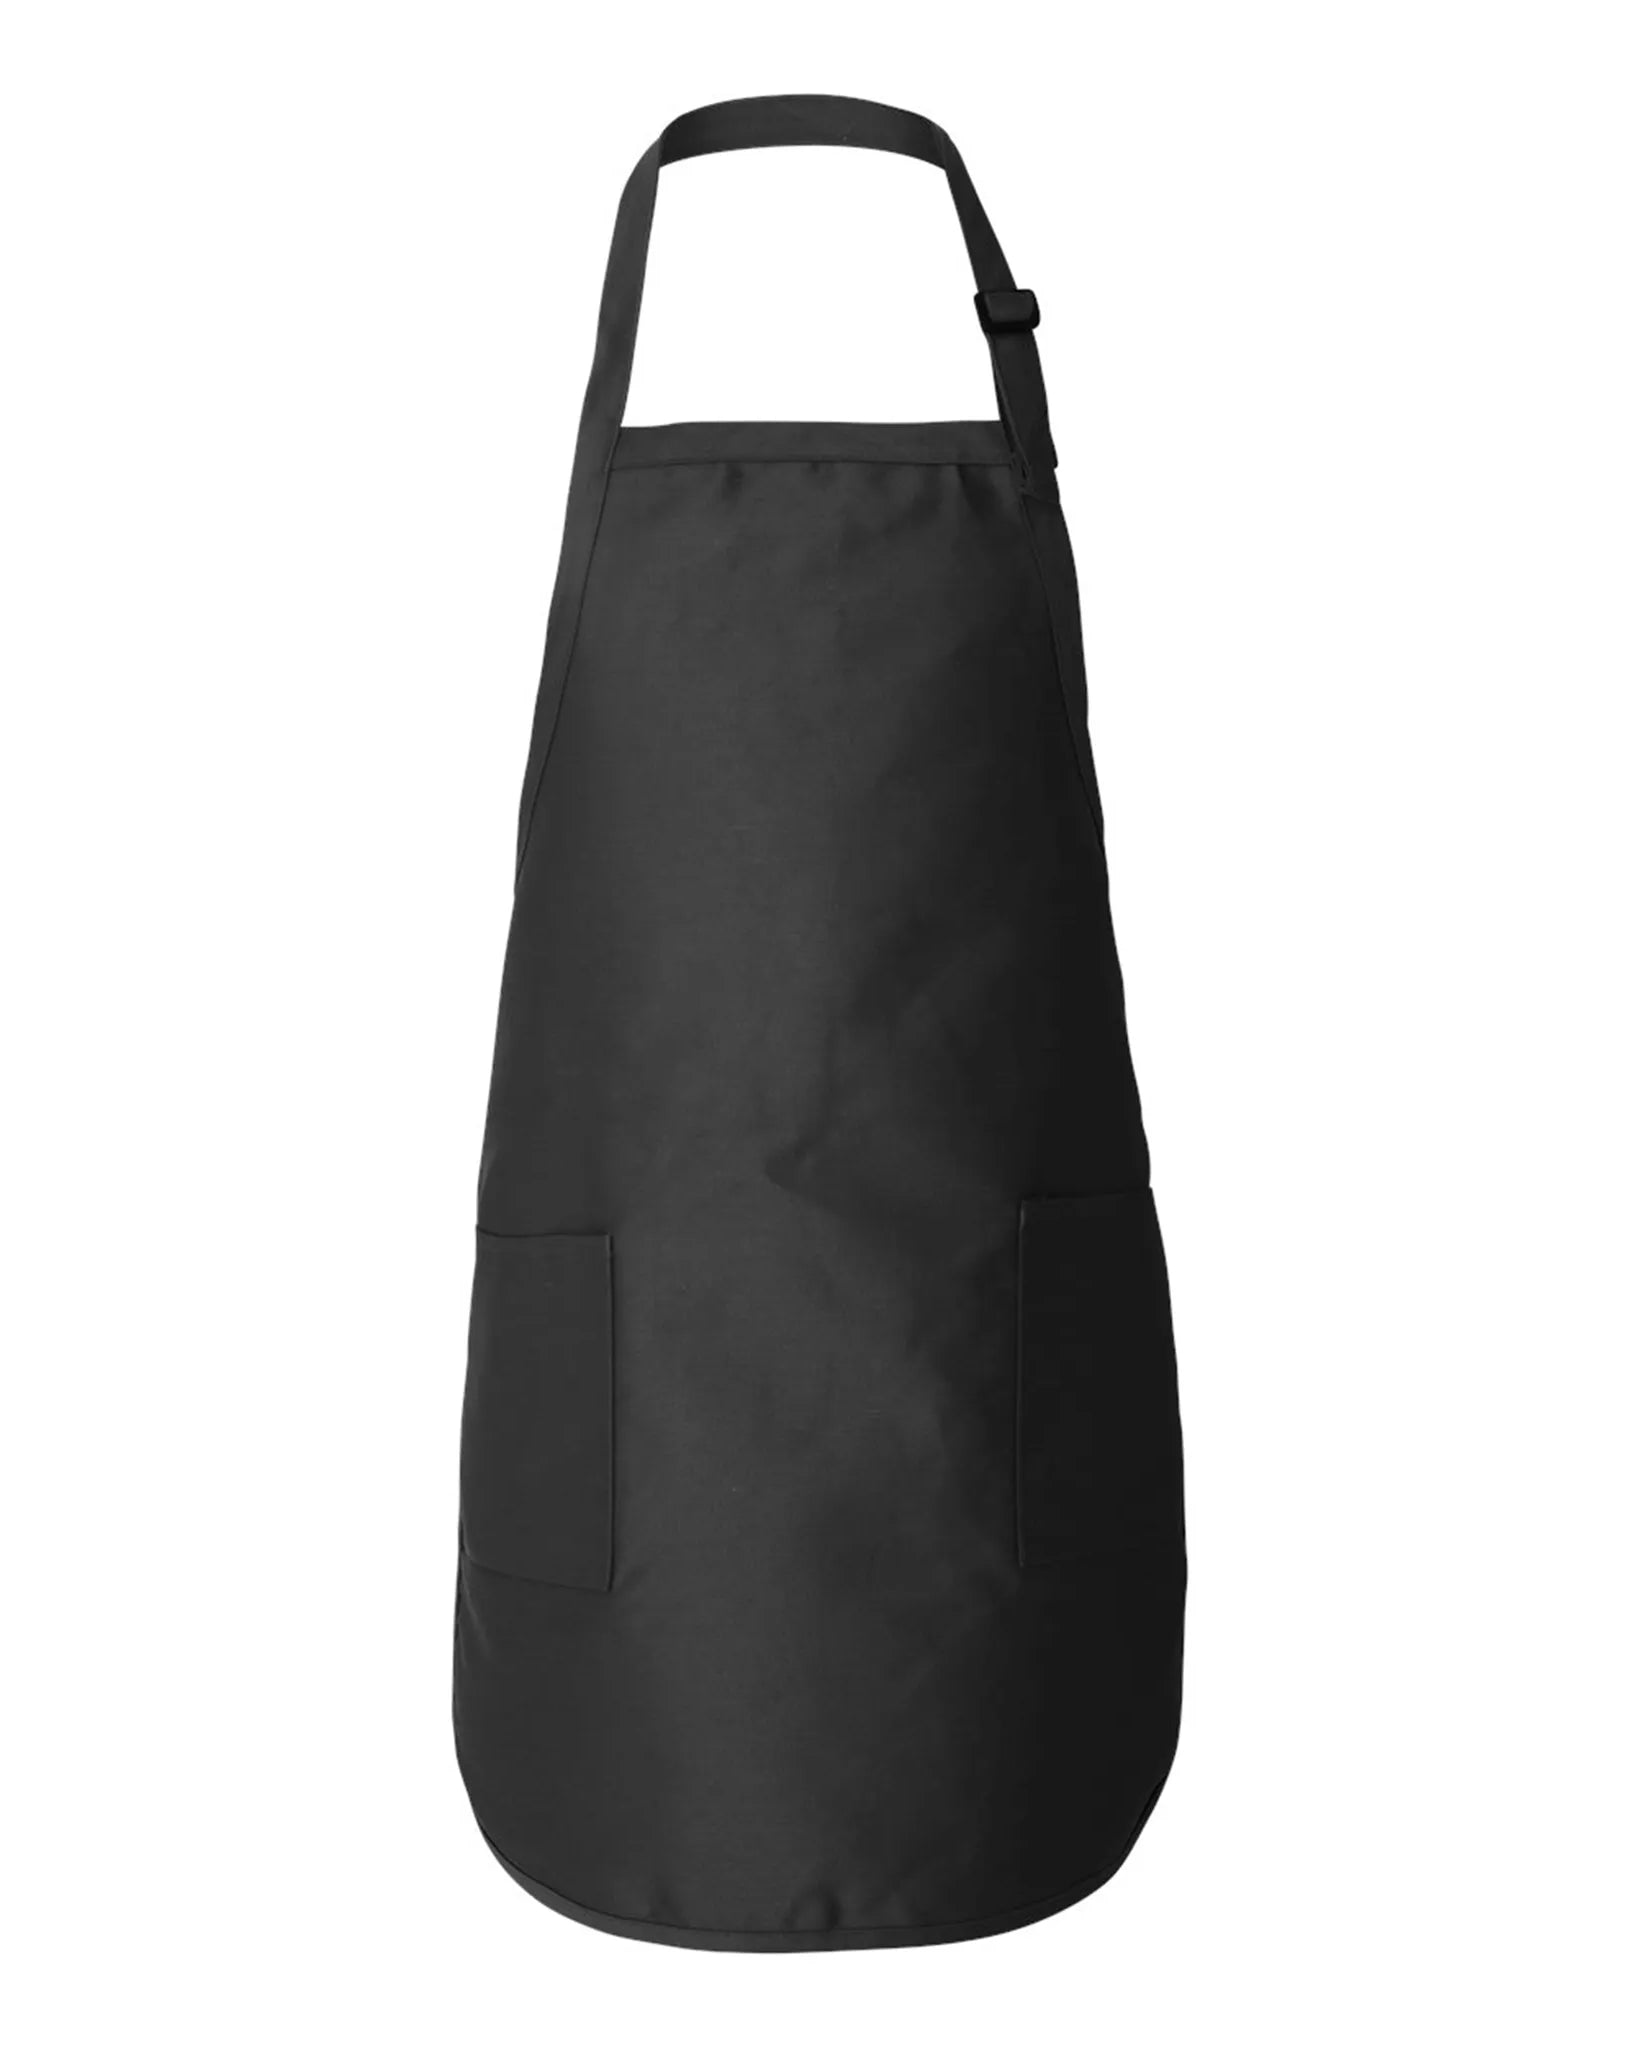 Full-Length Apron with Pockets - Q4350